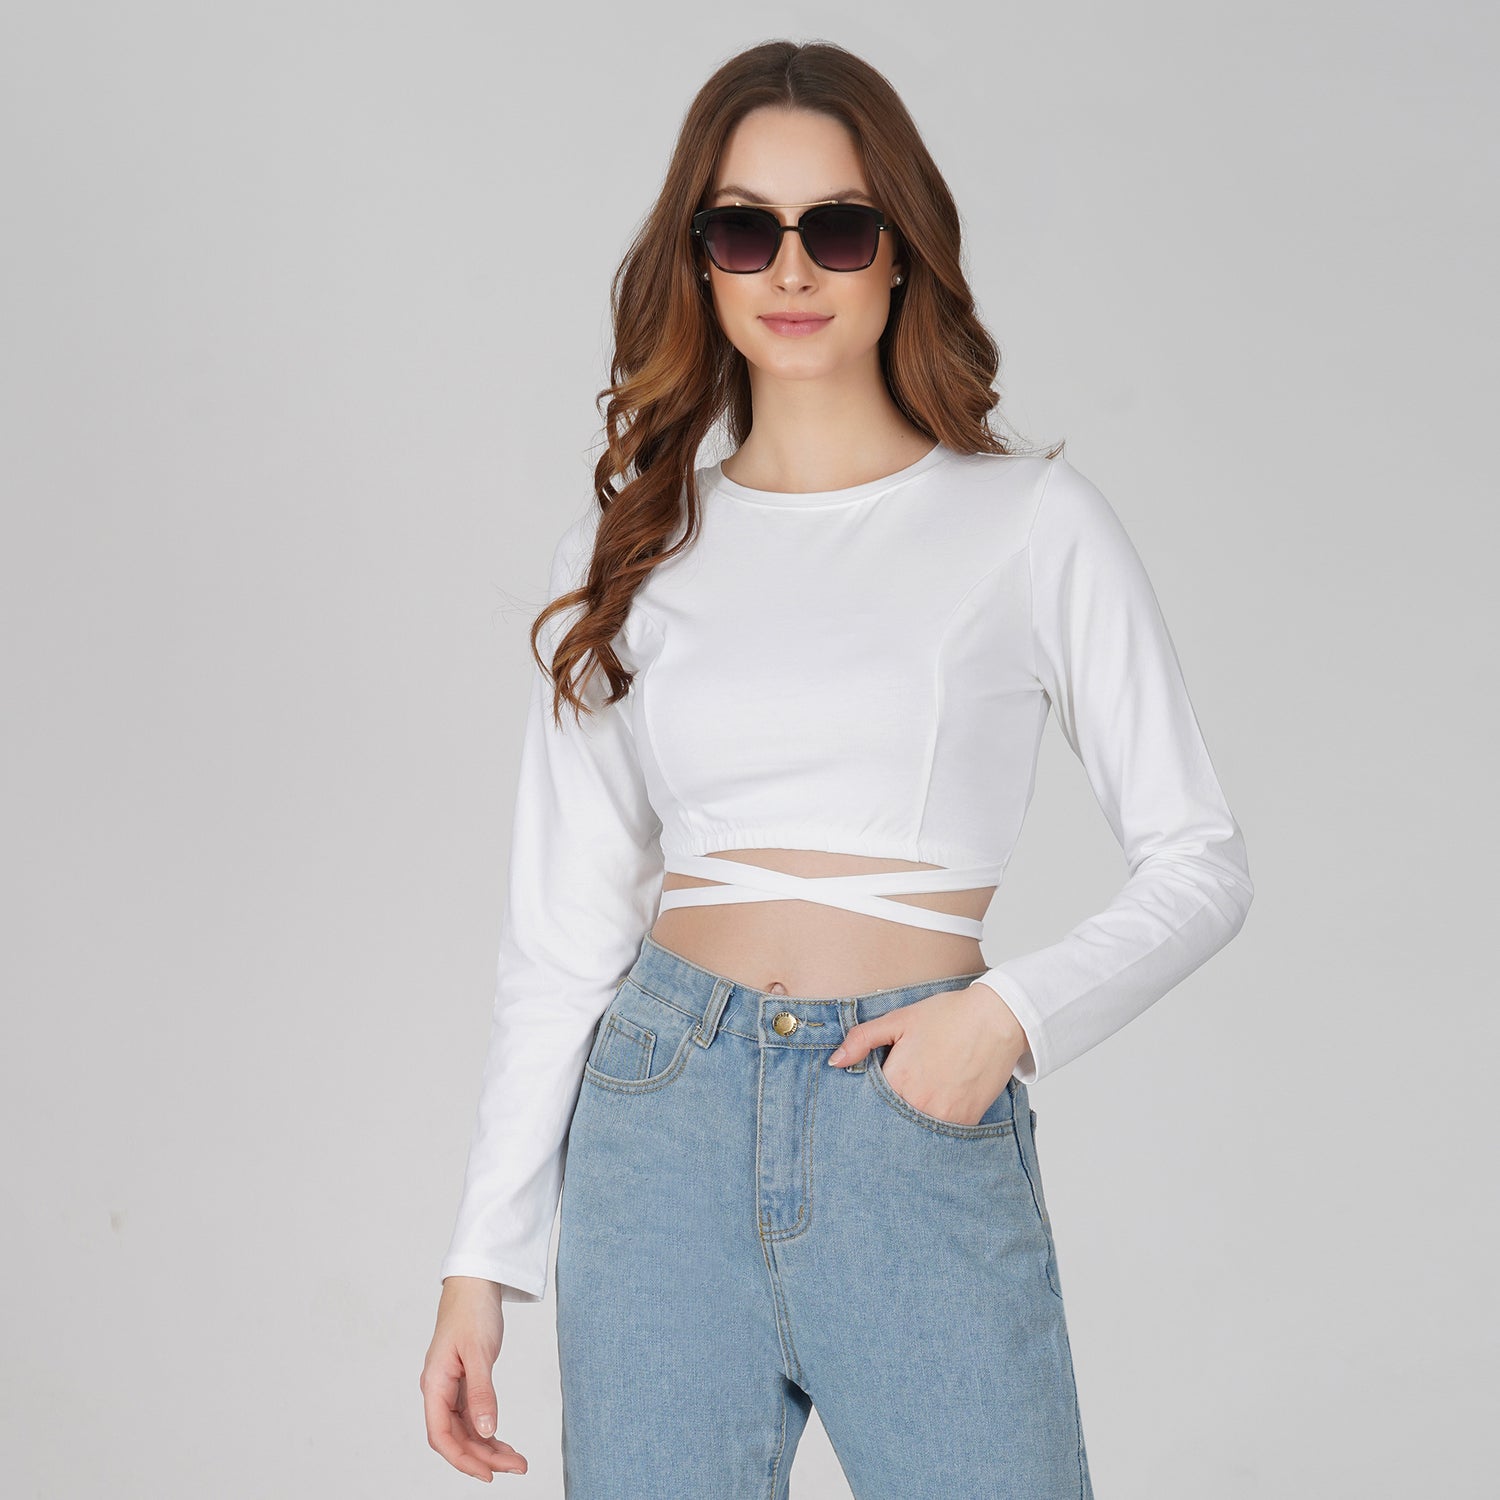 White crop tops for women